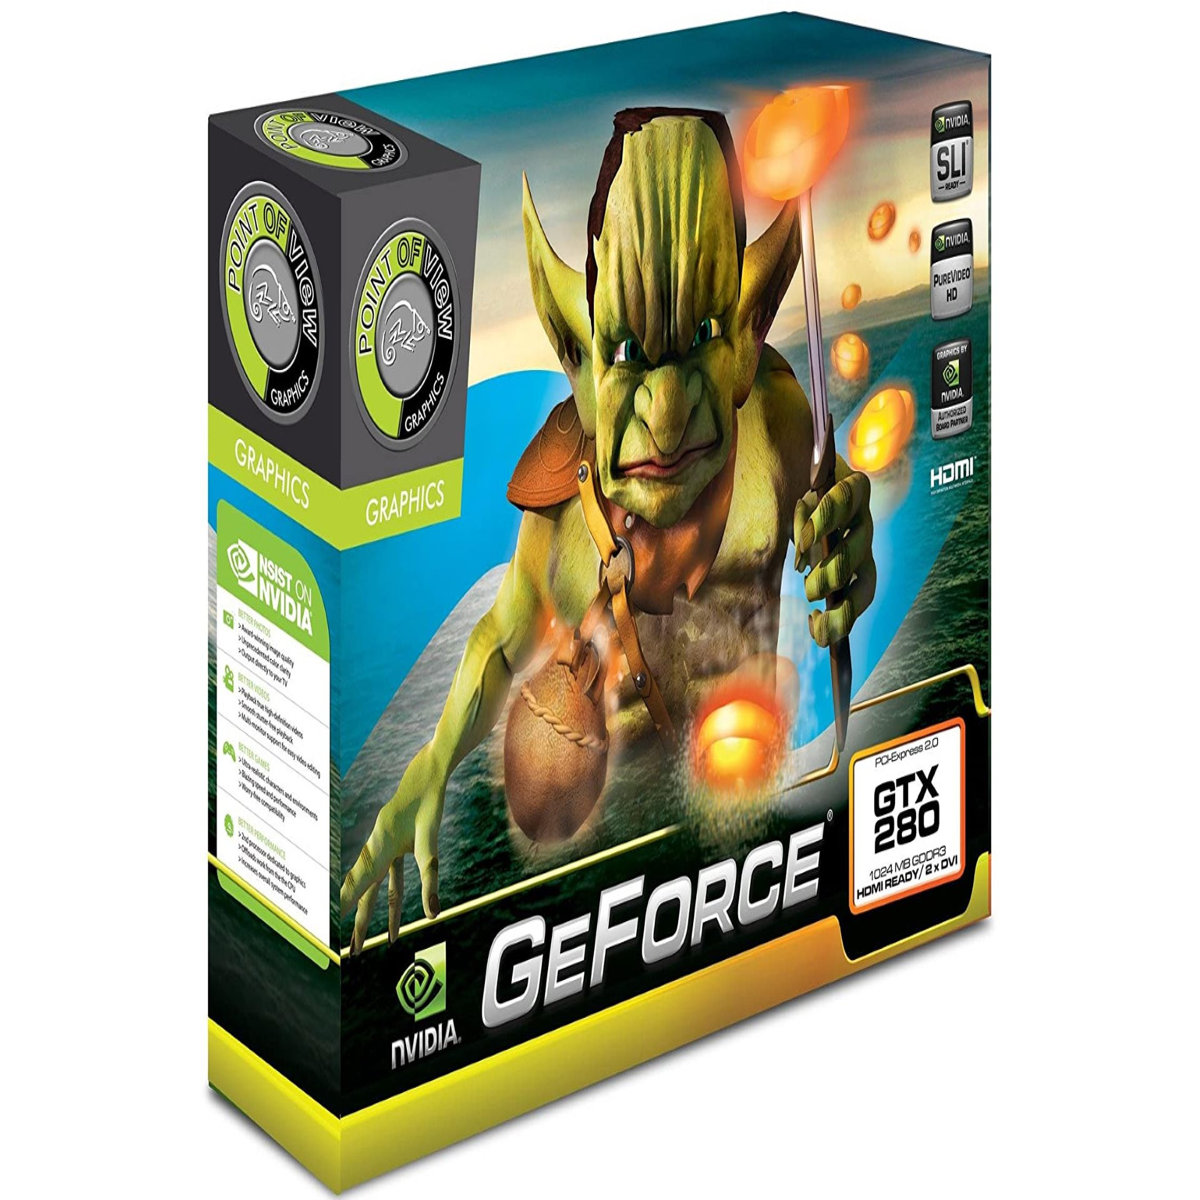 https://assetsio.reedpopcdn.com/goblin-graphics-card.jpg?width=1200&height=1200&fit=crop&quality=100&format=png&enable=upscale&auto=webp